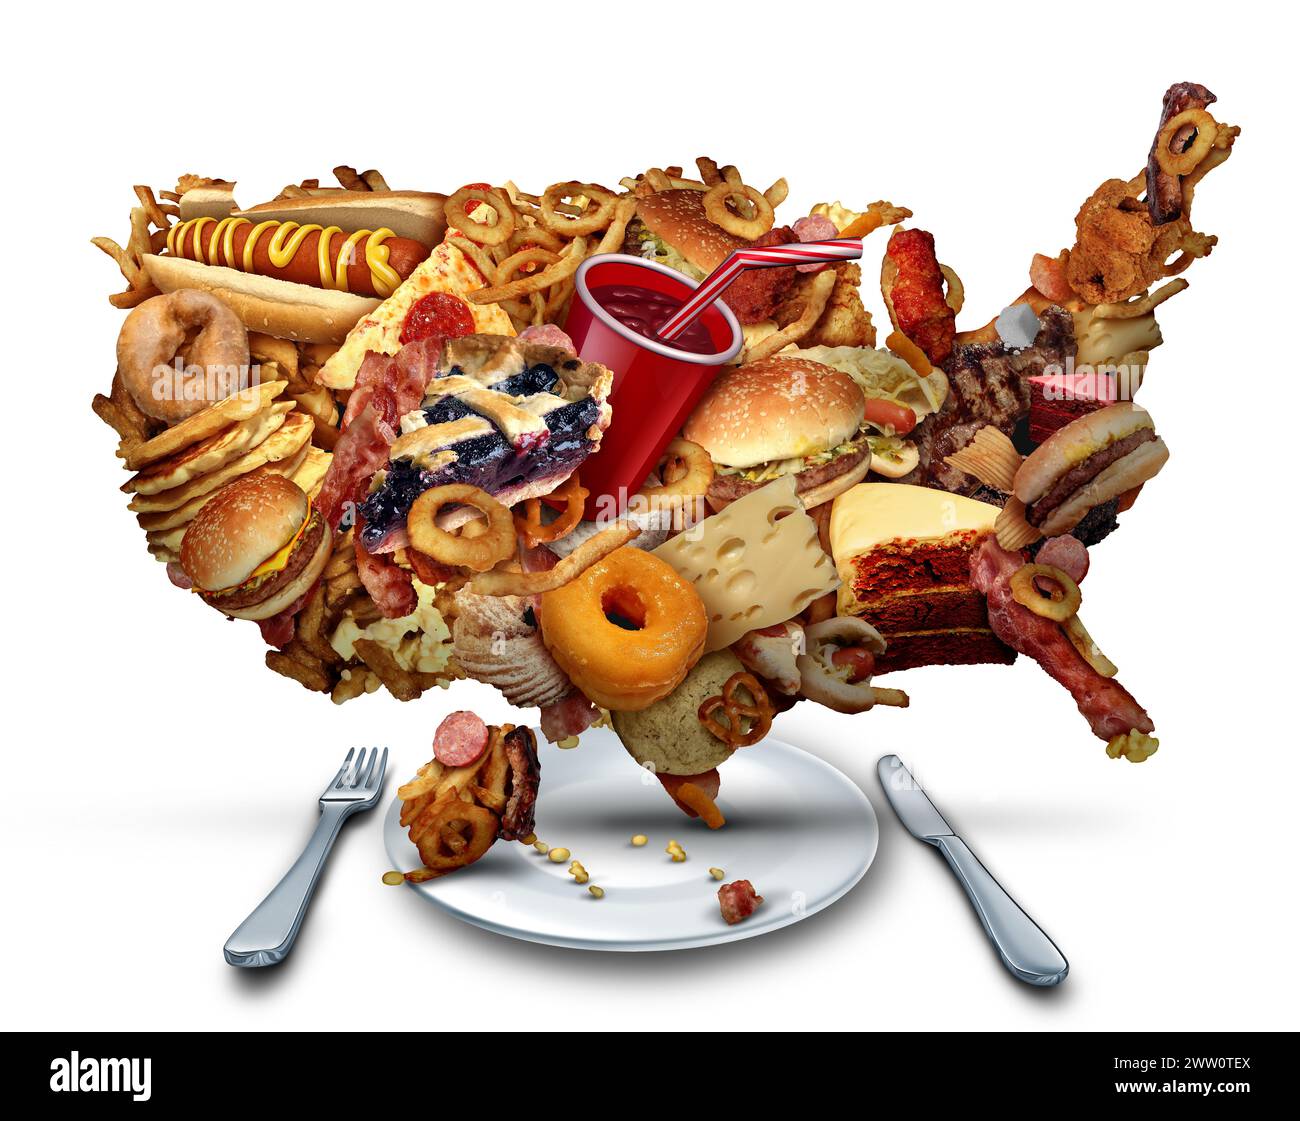 US Unhealthy Eating Habits and American Junk Food Crisisor fast-food Diet as United States nutrition issue representing obesity in America and greasy Stock Photo